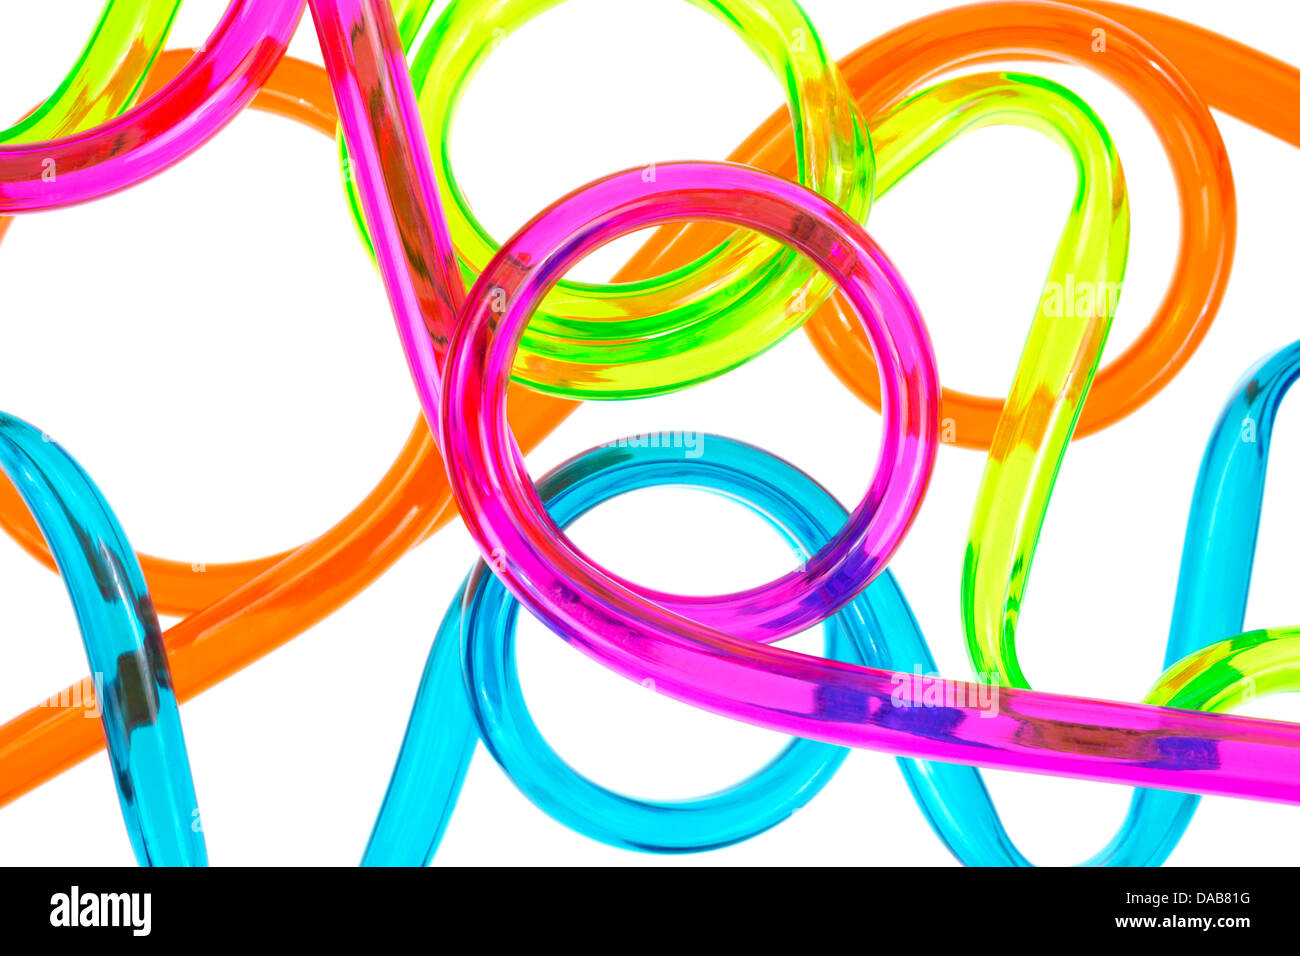 Close view of several plastic tubes that have been bent and looped on a white background. Stock Photo